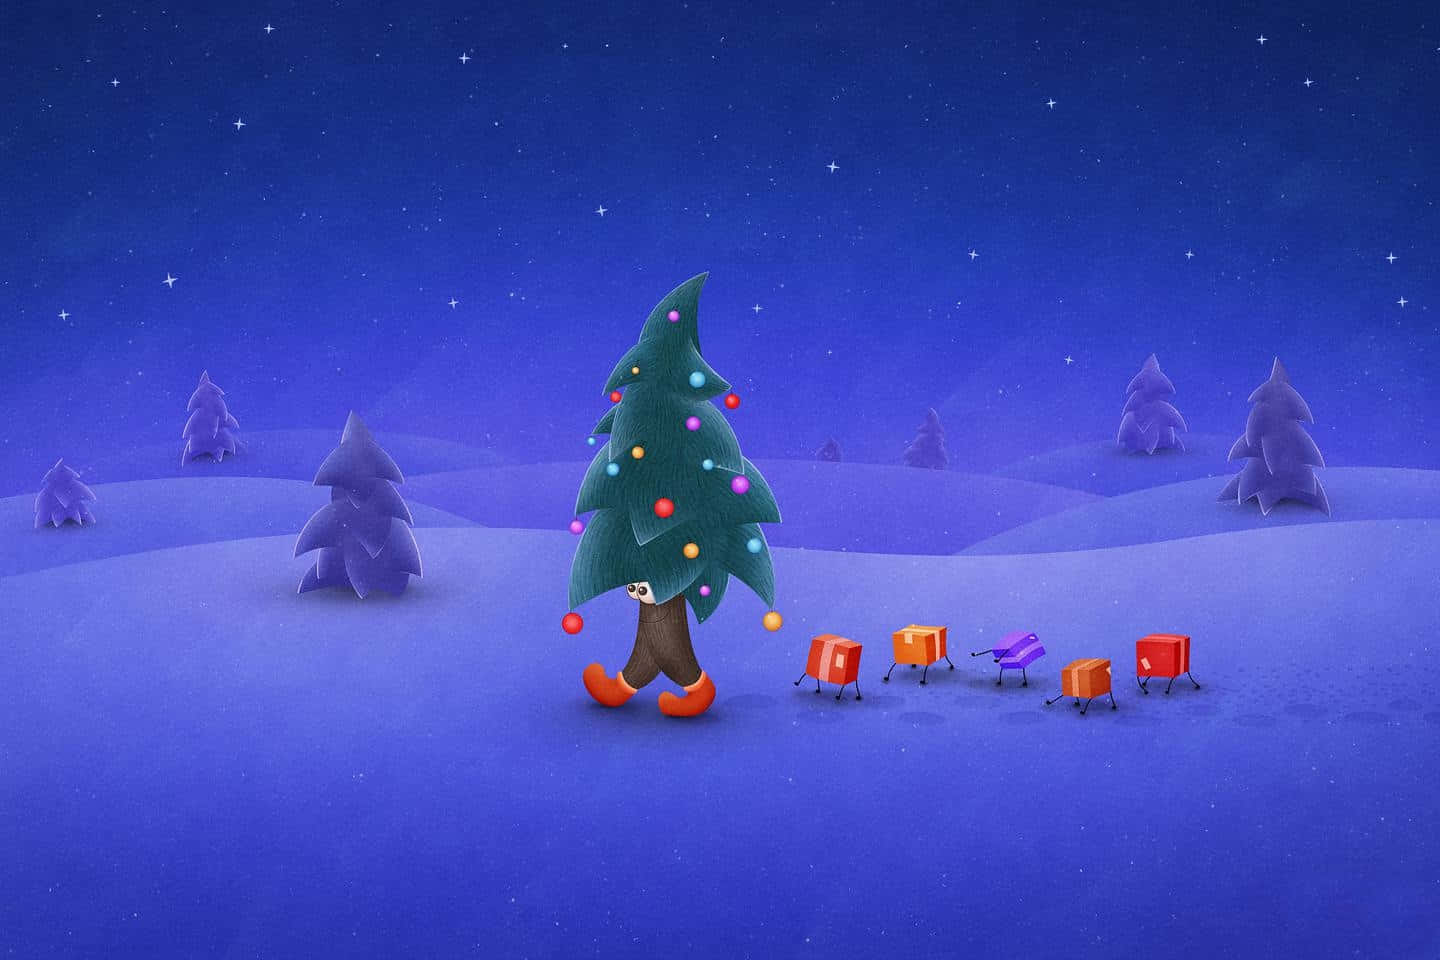 Get Ready For Christmas with This Glowing Simple Christmas Ipad Wallpaper